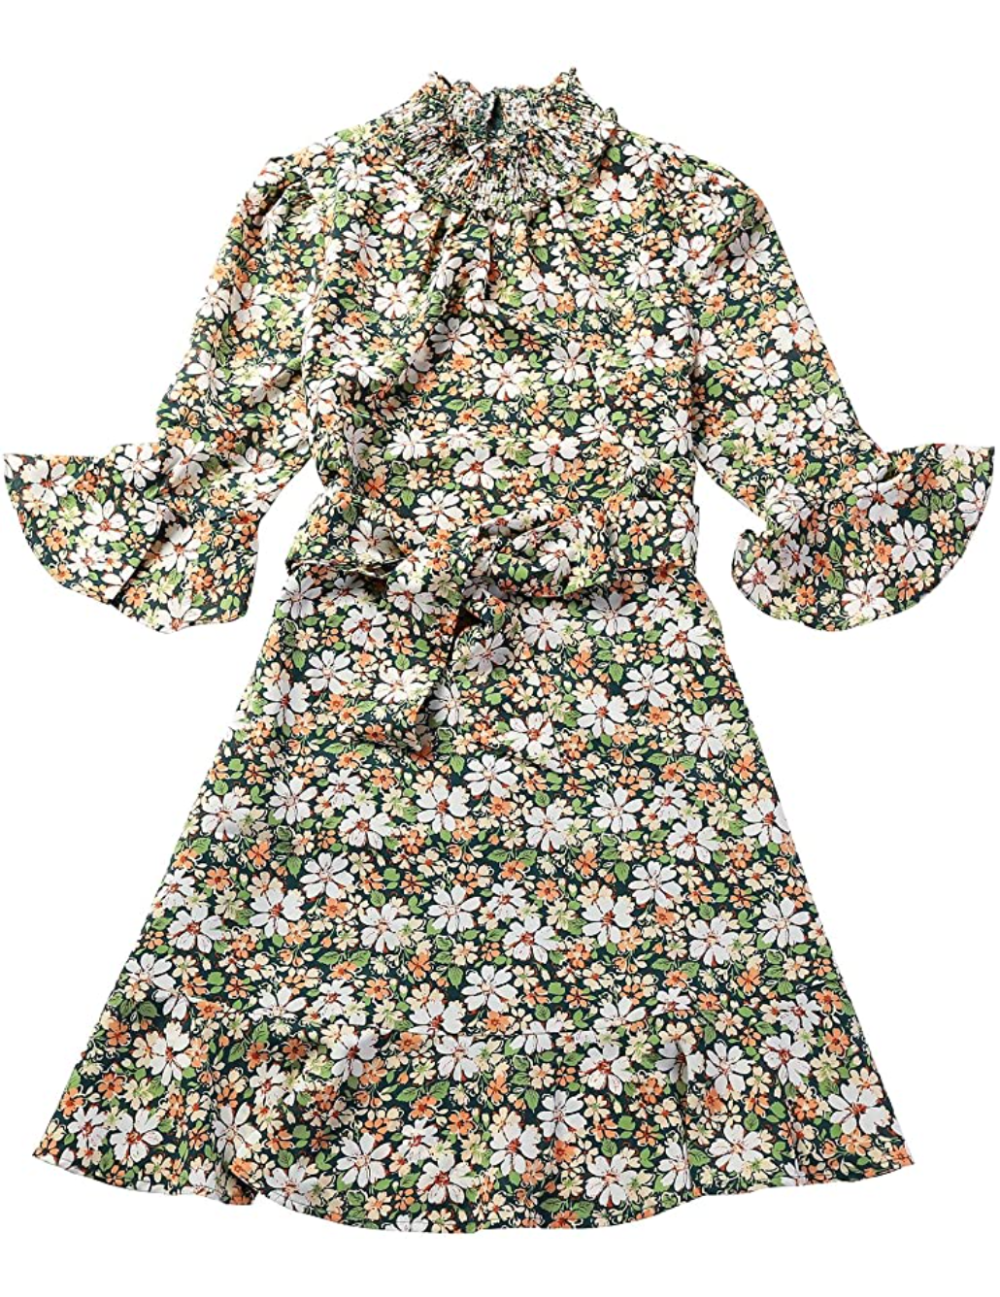 Allegra K Adorable Dress Is Perfect for Styling Florals in Fall